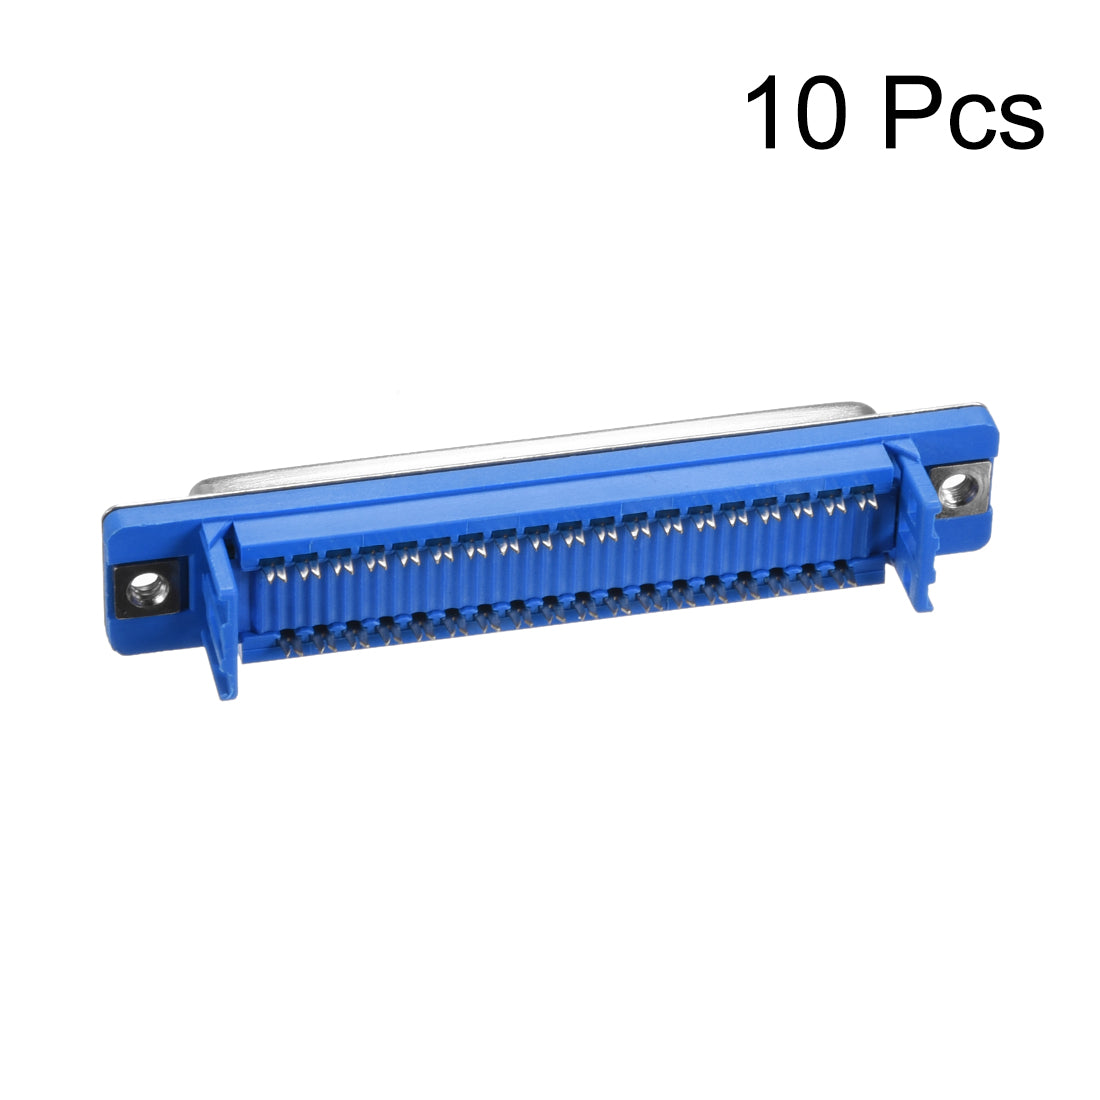 uxcell Uxcell IDC D-Sub Ribbon Cable Connector 37-pin 2-row Female Socket IDC Crimp Port Terminal Breakout for Flat Ribbon Cable Blue 10pcs